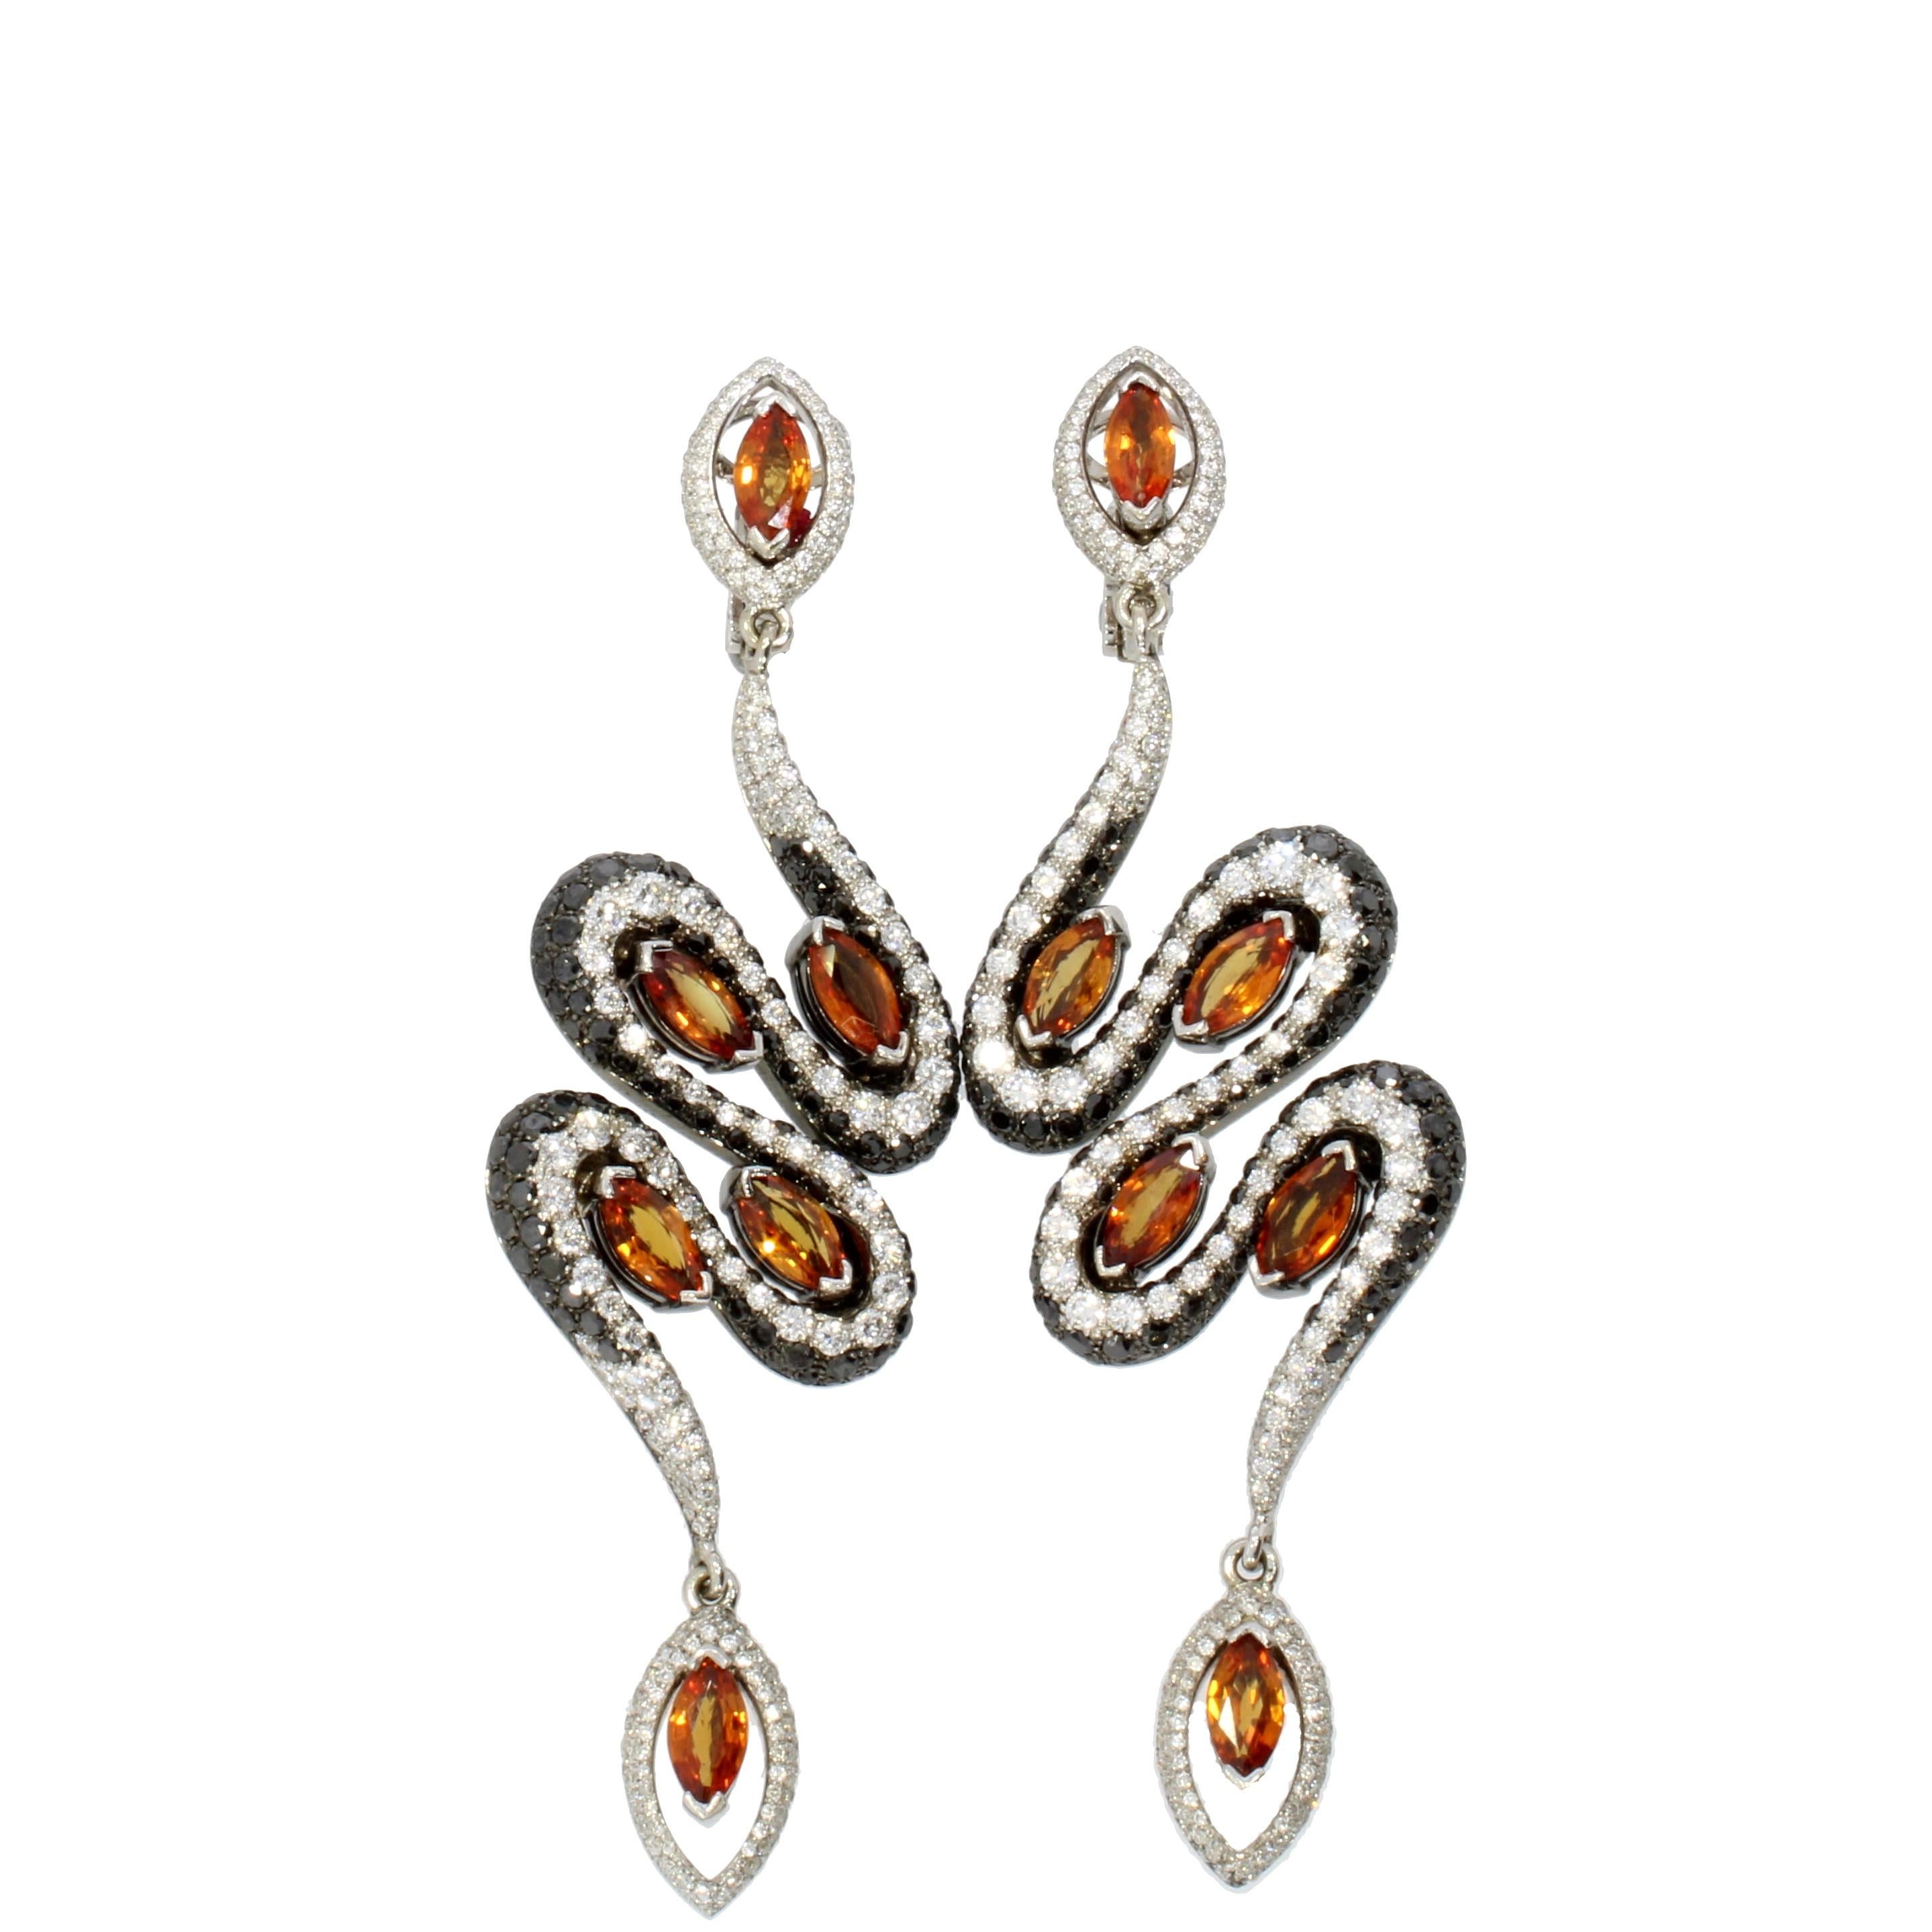 Contemporary 18 Karat White Gold Orange Sapphire and Diamond Signature Earrings by Niquesa For Sale